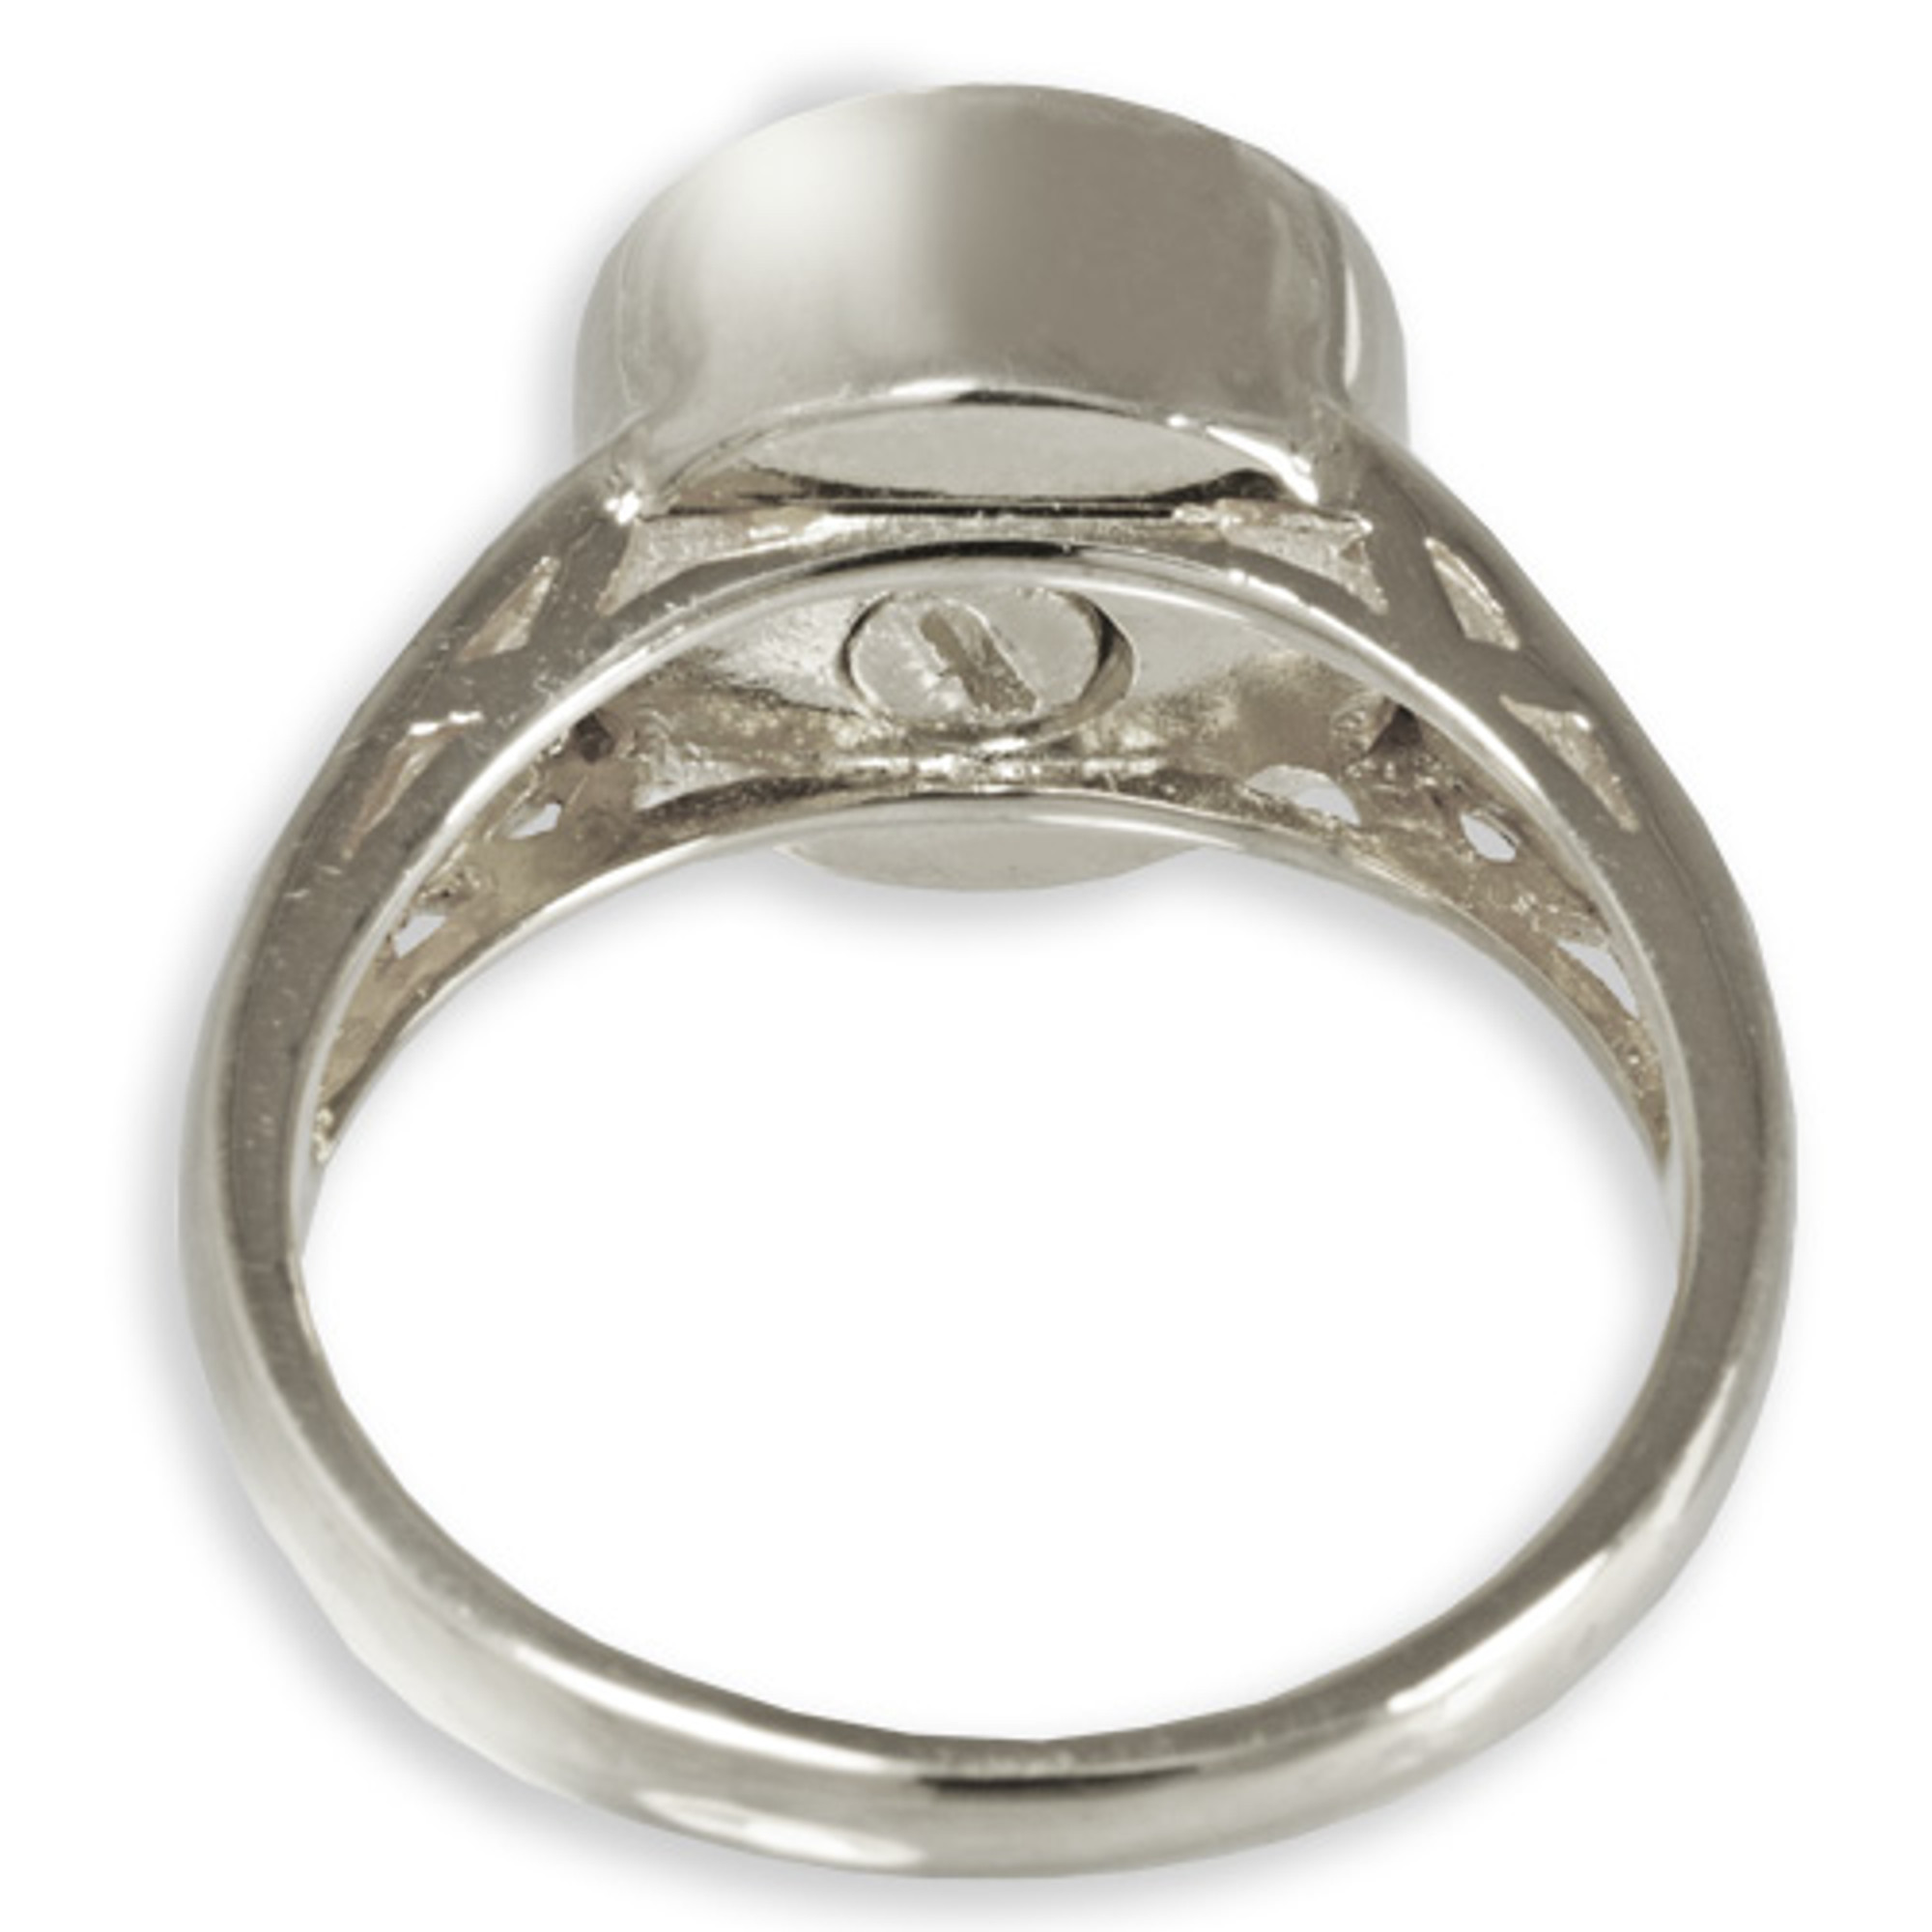 Pet Memorial Ring With Ashes & Fur | Jewelry by Johan - Jewelry by Johan